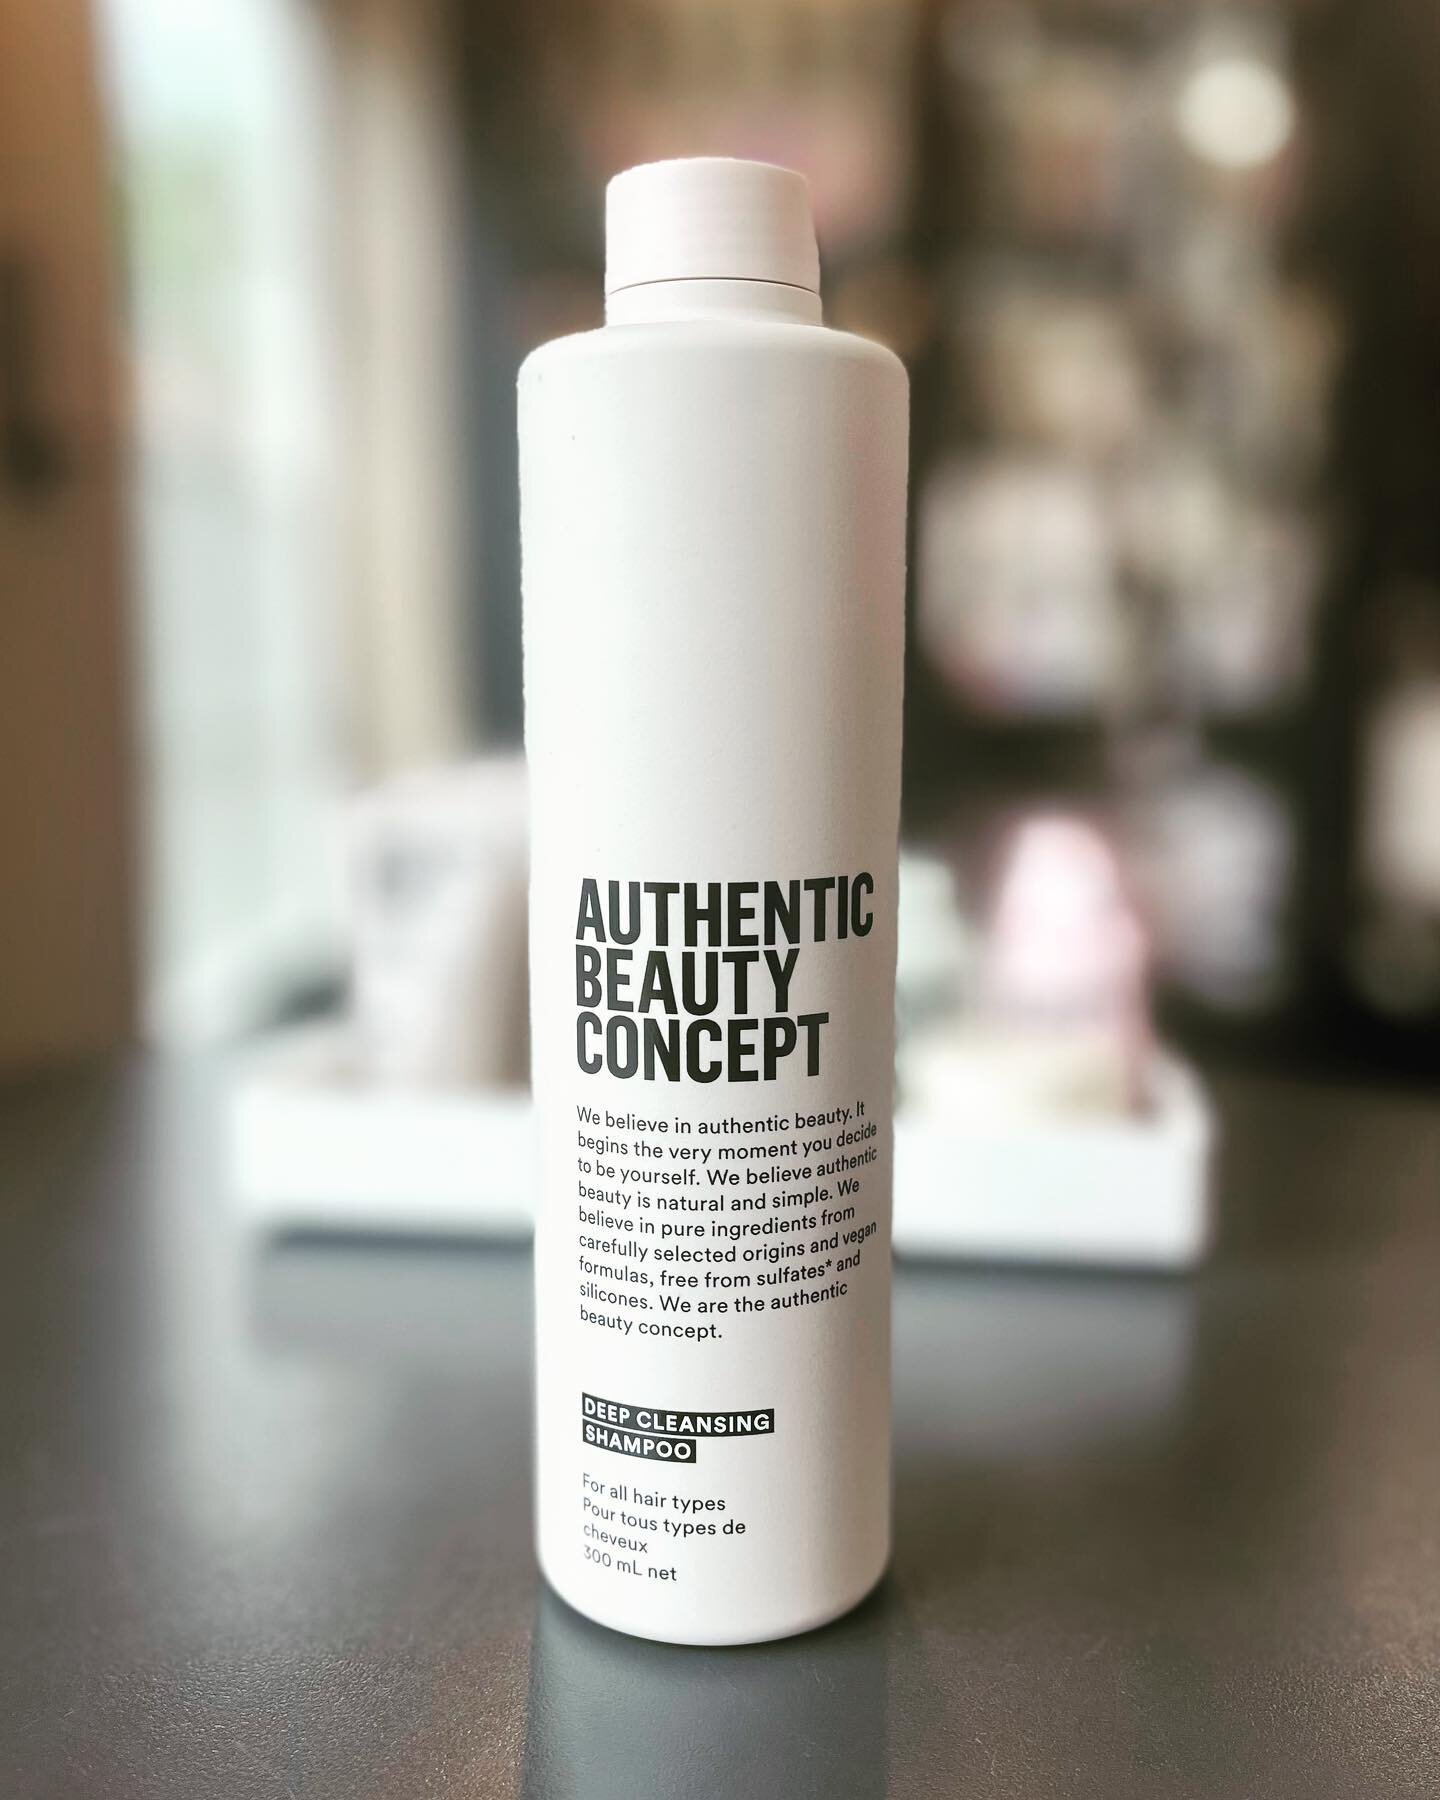 Deep Cleansing Shampoo 
- Helps absorb grease and impurities from the hair and scalp 
- Free from Sulfate surfactants, parabens and silicones 
- The formula mixes well with water to remove dirt, oils, and pollutants so they can be rinsed away